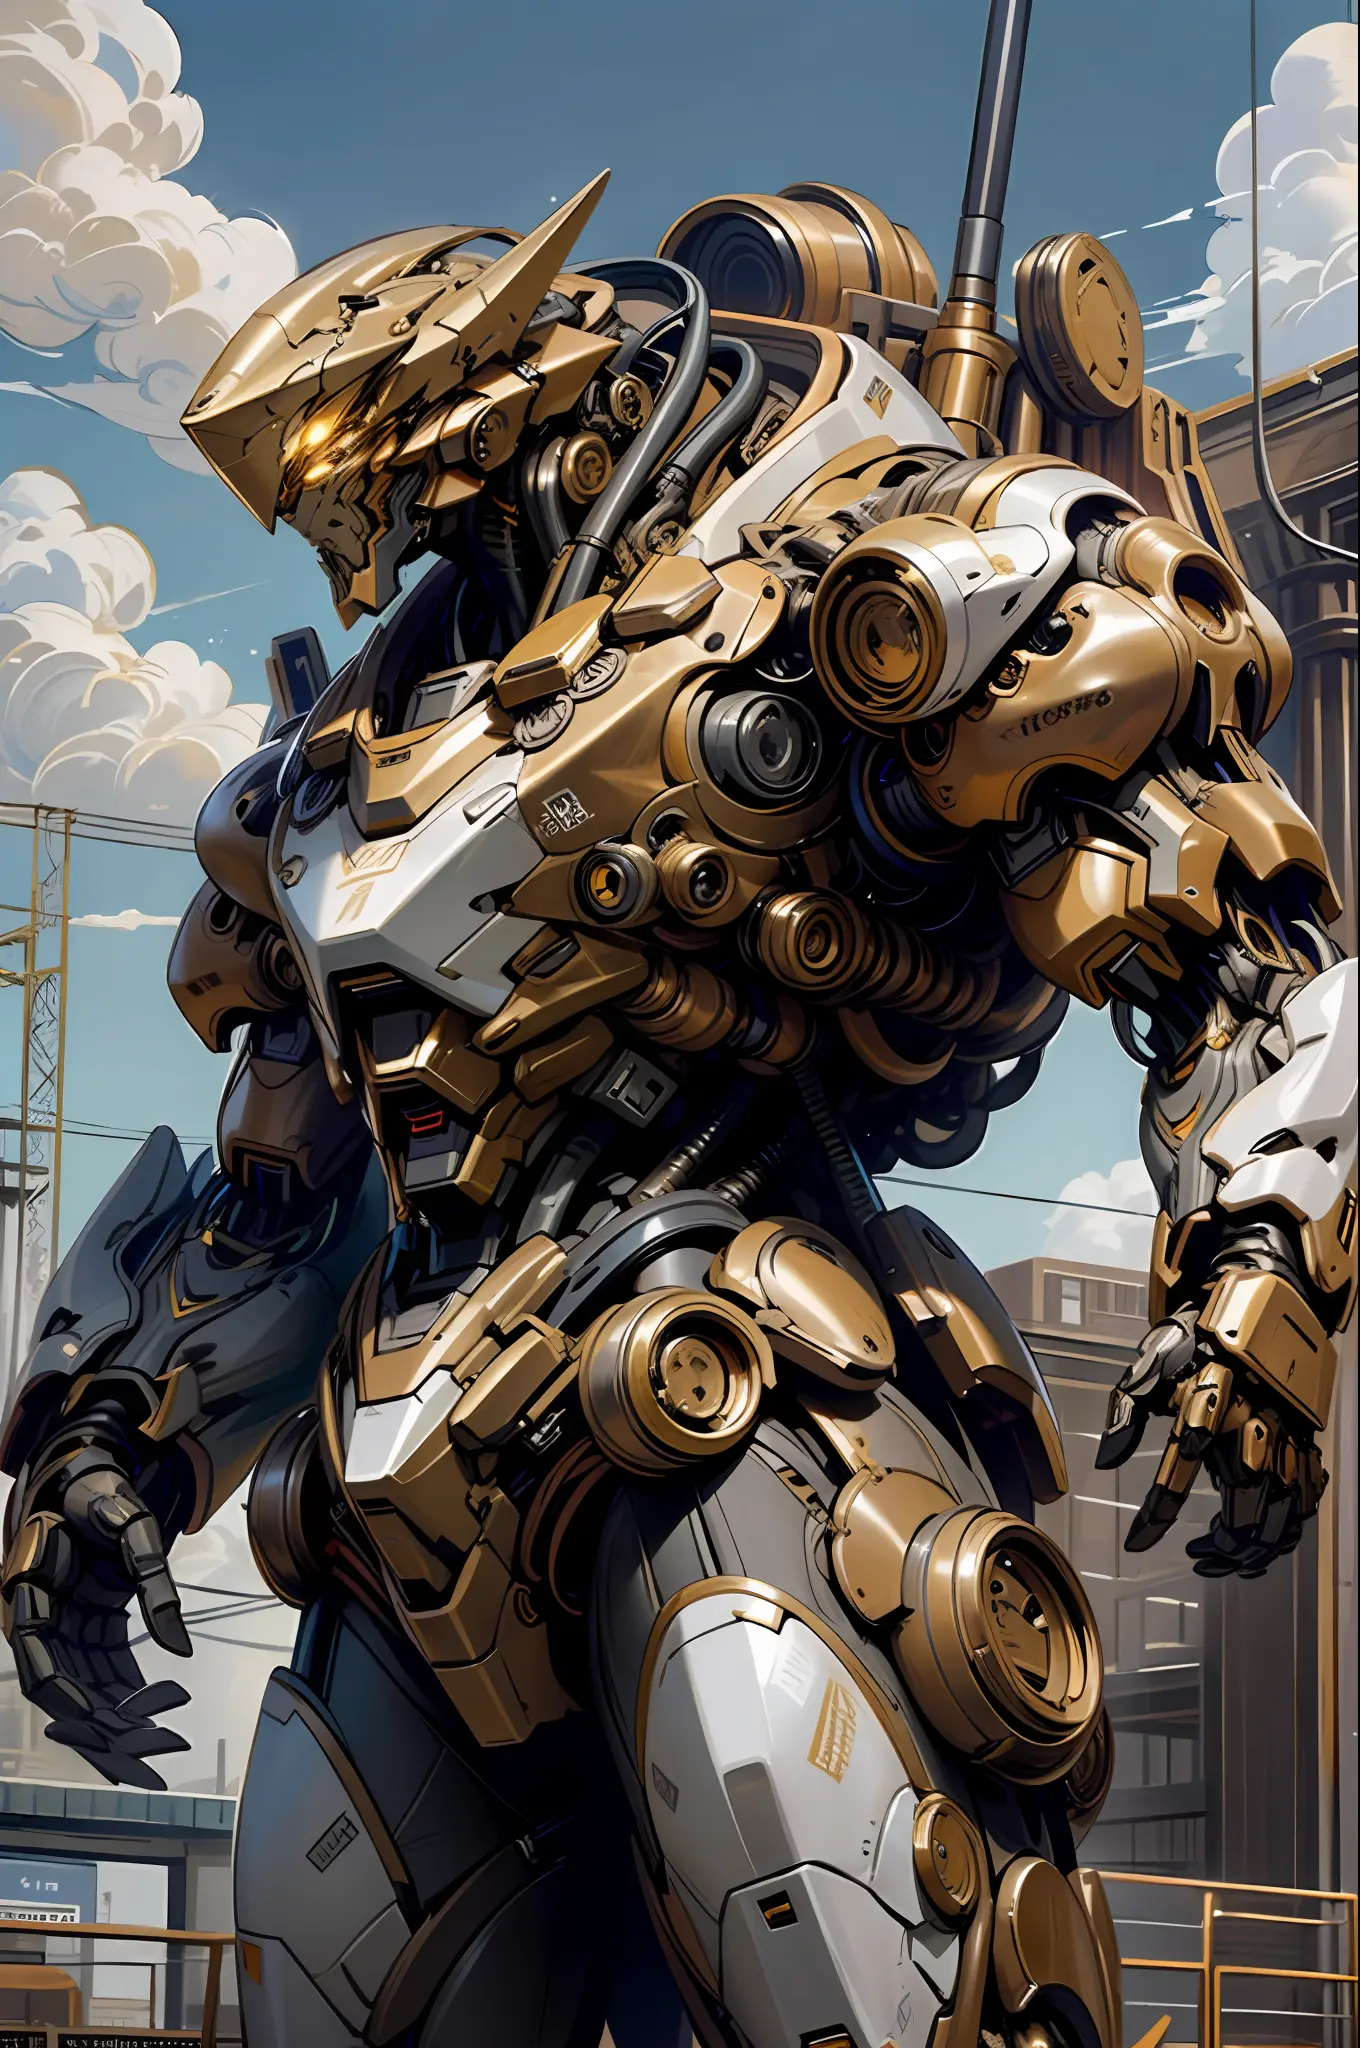 (Masterpiece, Best Quality: 1.3), Very Detailed, Complex, 8k, HDR, Sky, Clouds, Weapon, Glowing, Buildings, Glowing Eyes, Golden Mech, Science Fiction, Realistic, Golden Robot